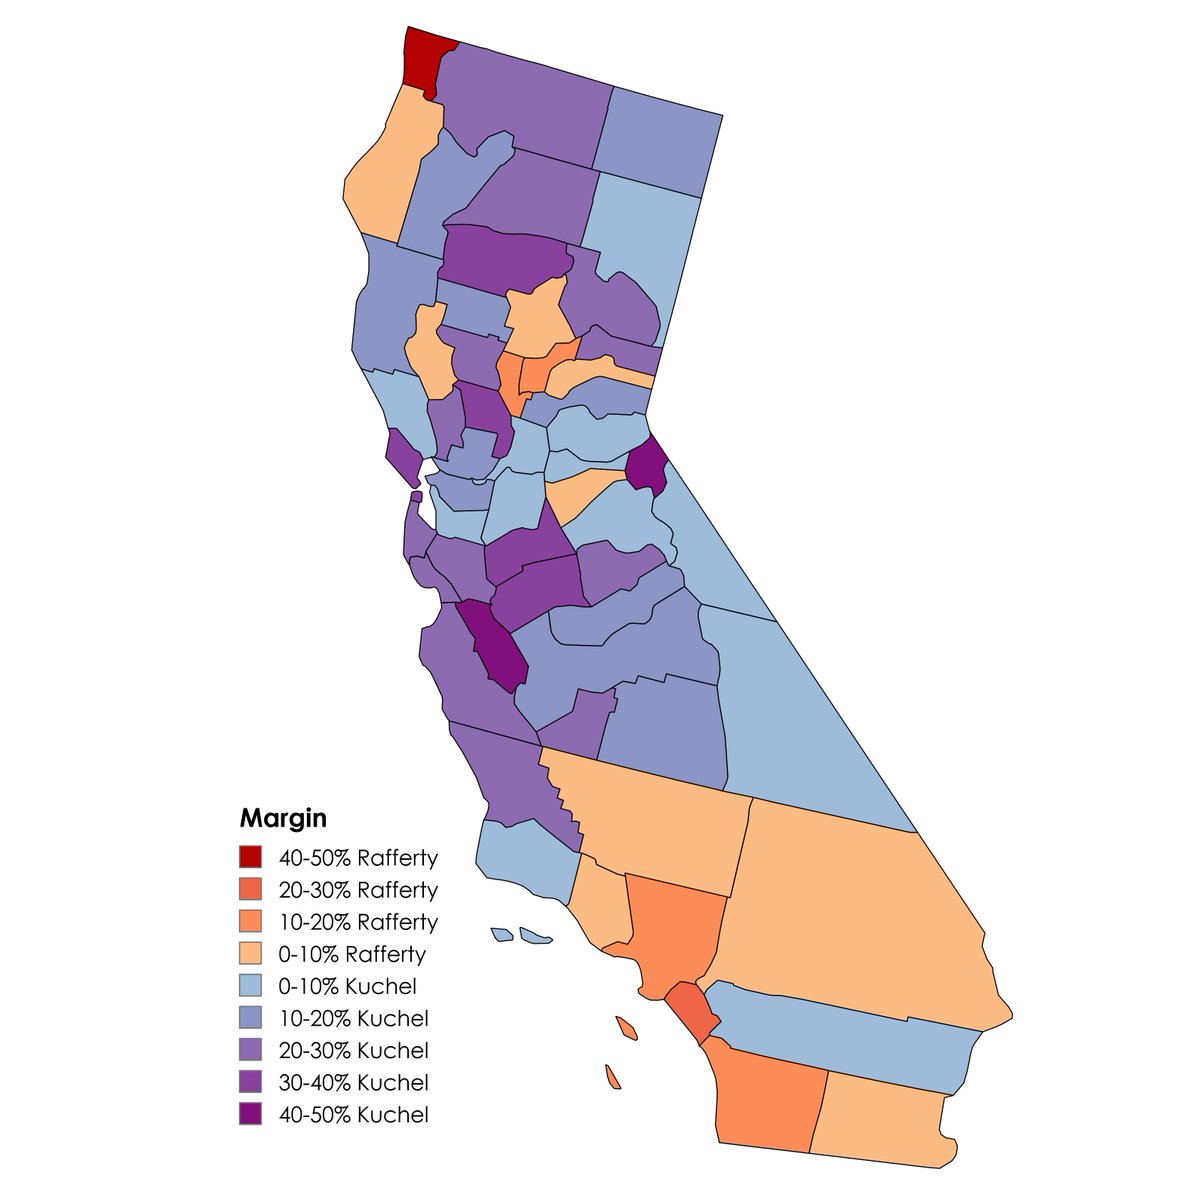 #ElectionTwitter Here's a map of the 1968 Republican primary for US Senate in California. Incumbent Senator Thomas Kuchel was viewed as being too liberal, and was narrowly defeated by state Superintendent of Public Instruction Max Rafferty.